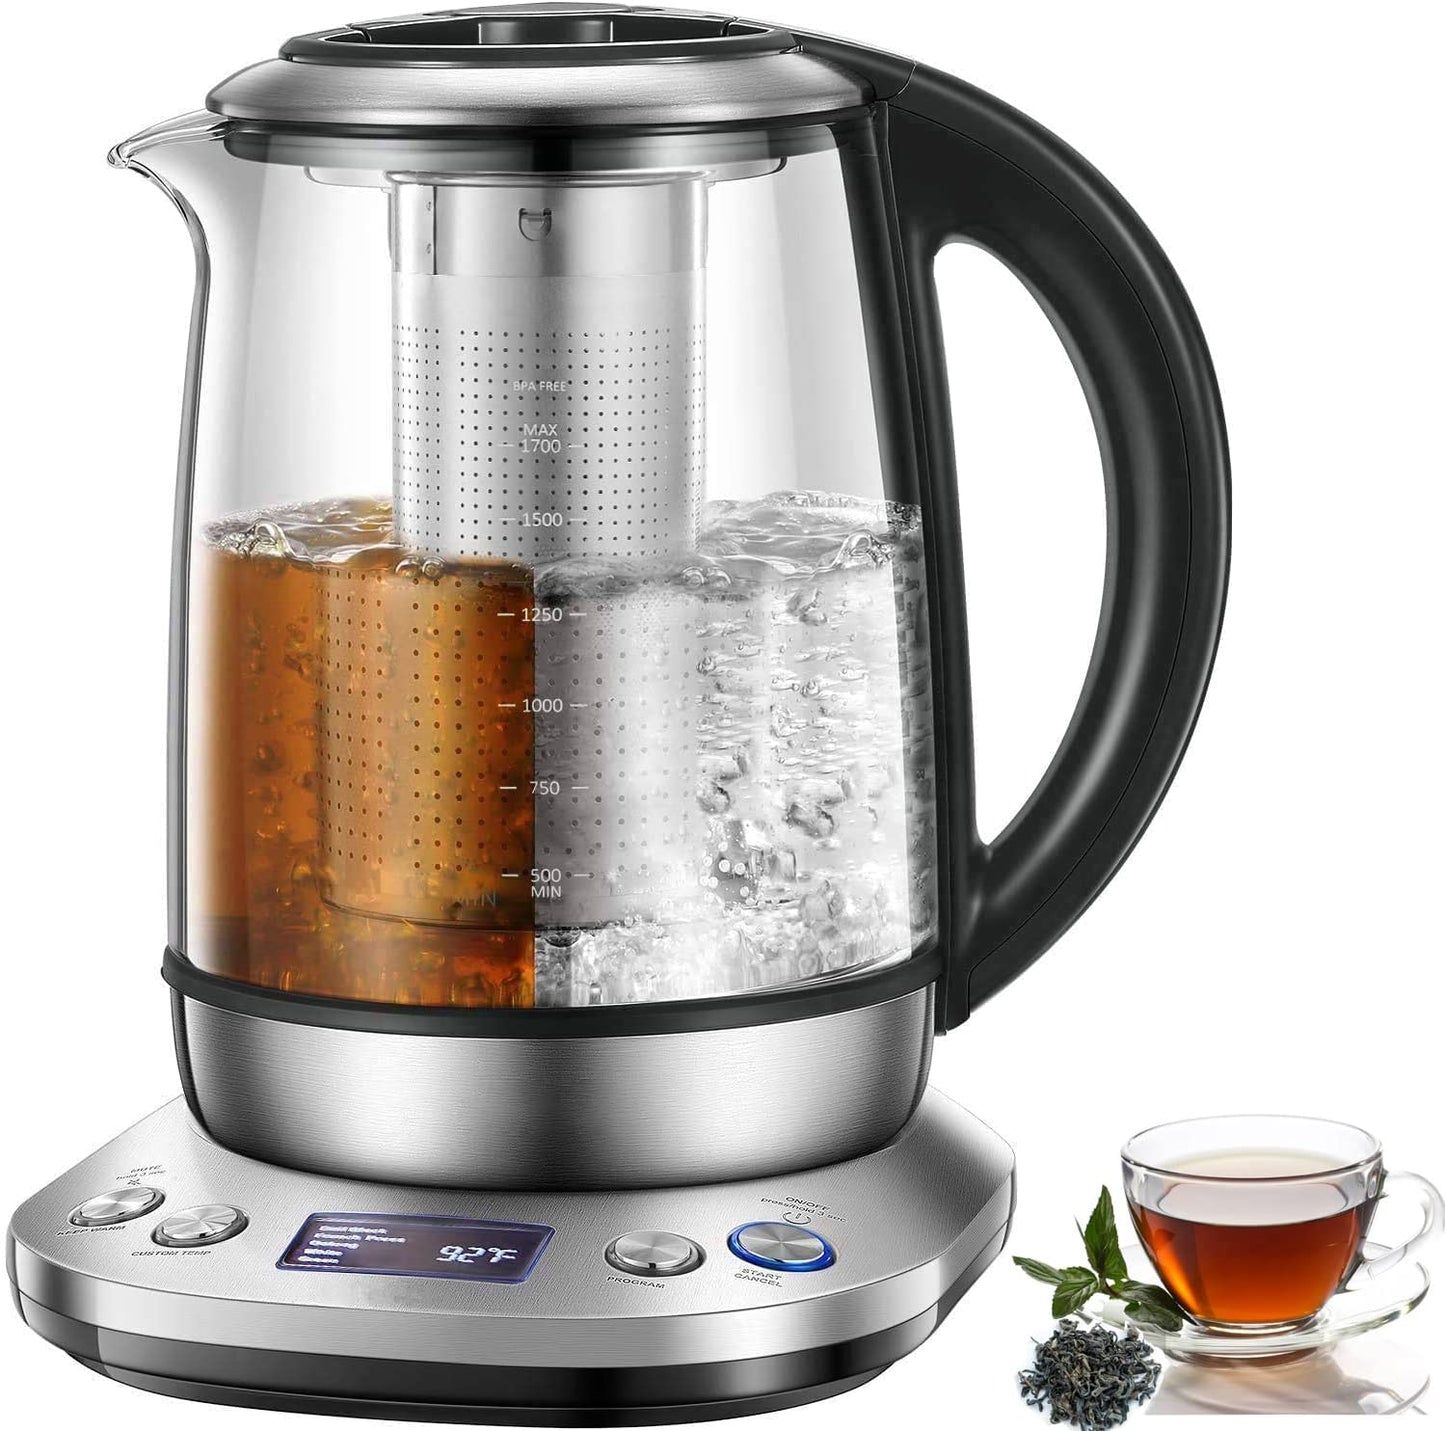 Decen Electric Tea Kettle, 1200W Variable Temperature Smart Tea Maker, Fast Boil Electric Glass Kettle with 2Hr Keep Warm Function, Premium Stainless Steel, Boil-Dry Protection, 1.7L